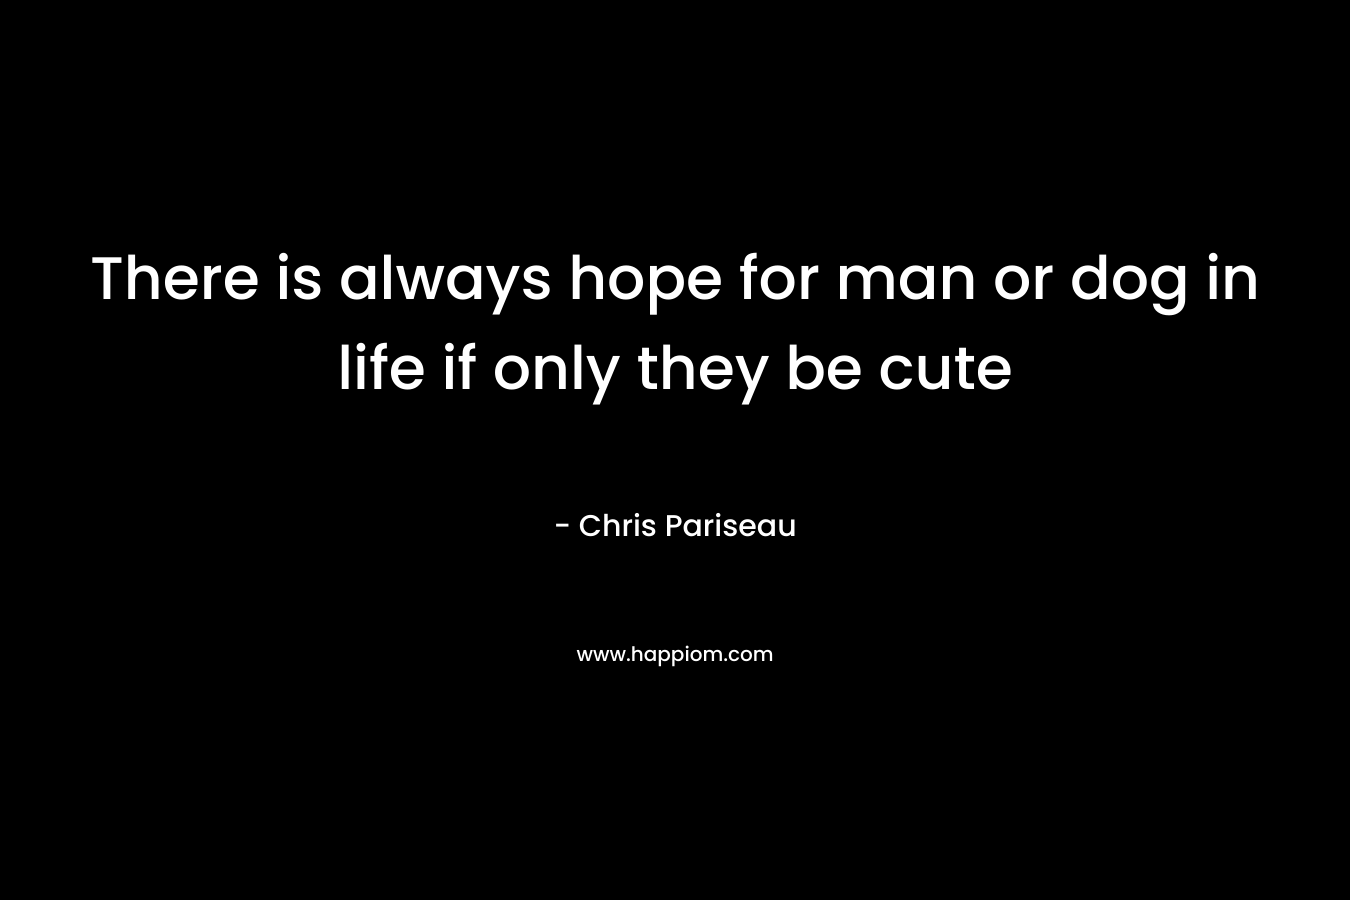 There is always hope for man or dog in life if only they be cute – Chris Pariseau